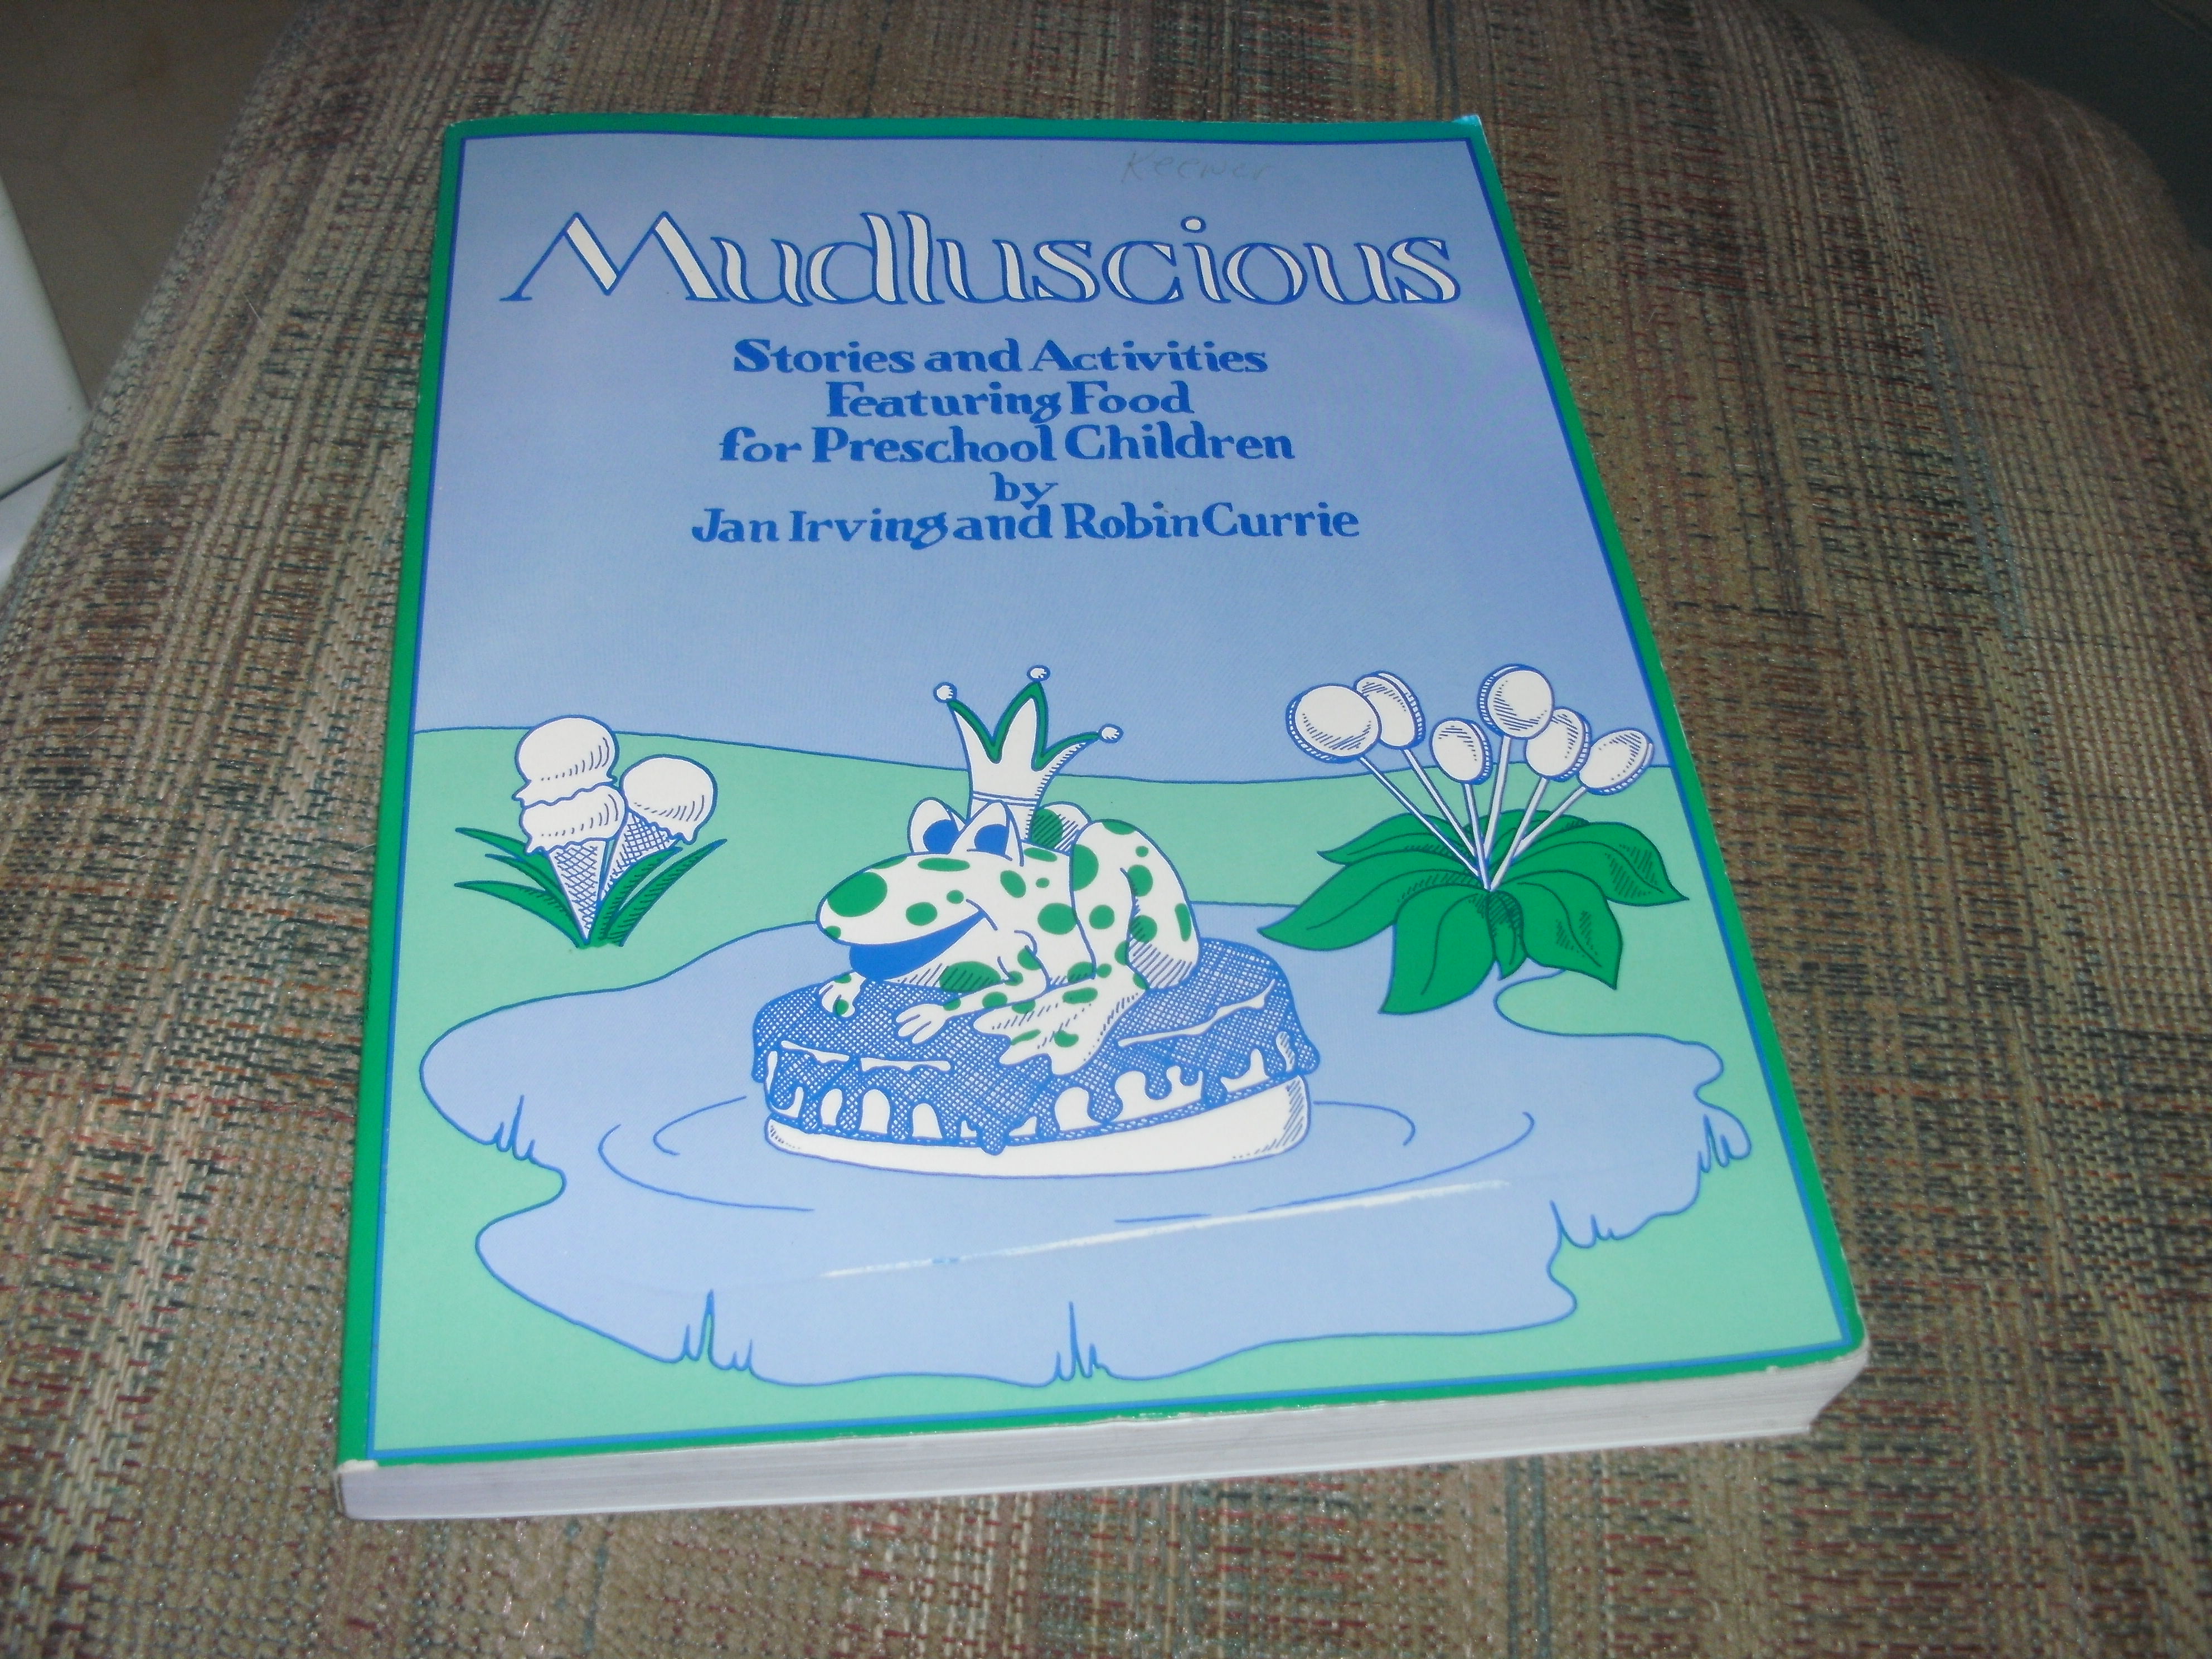 Mudluscious Stories and Activities for Preschool Children Featuring Food's featured image